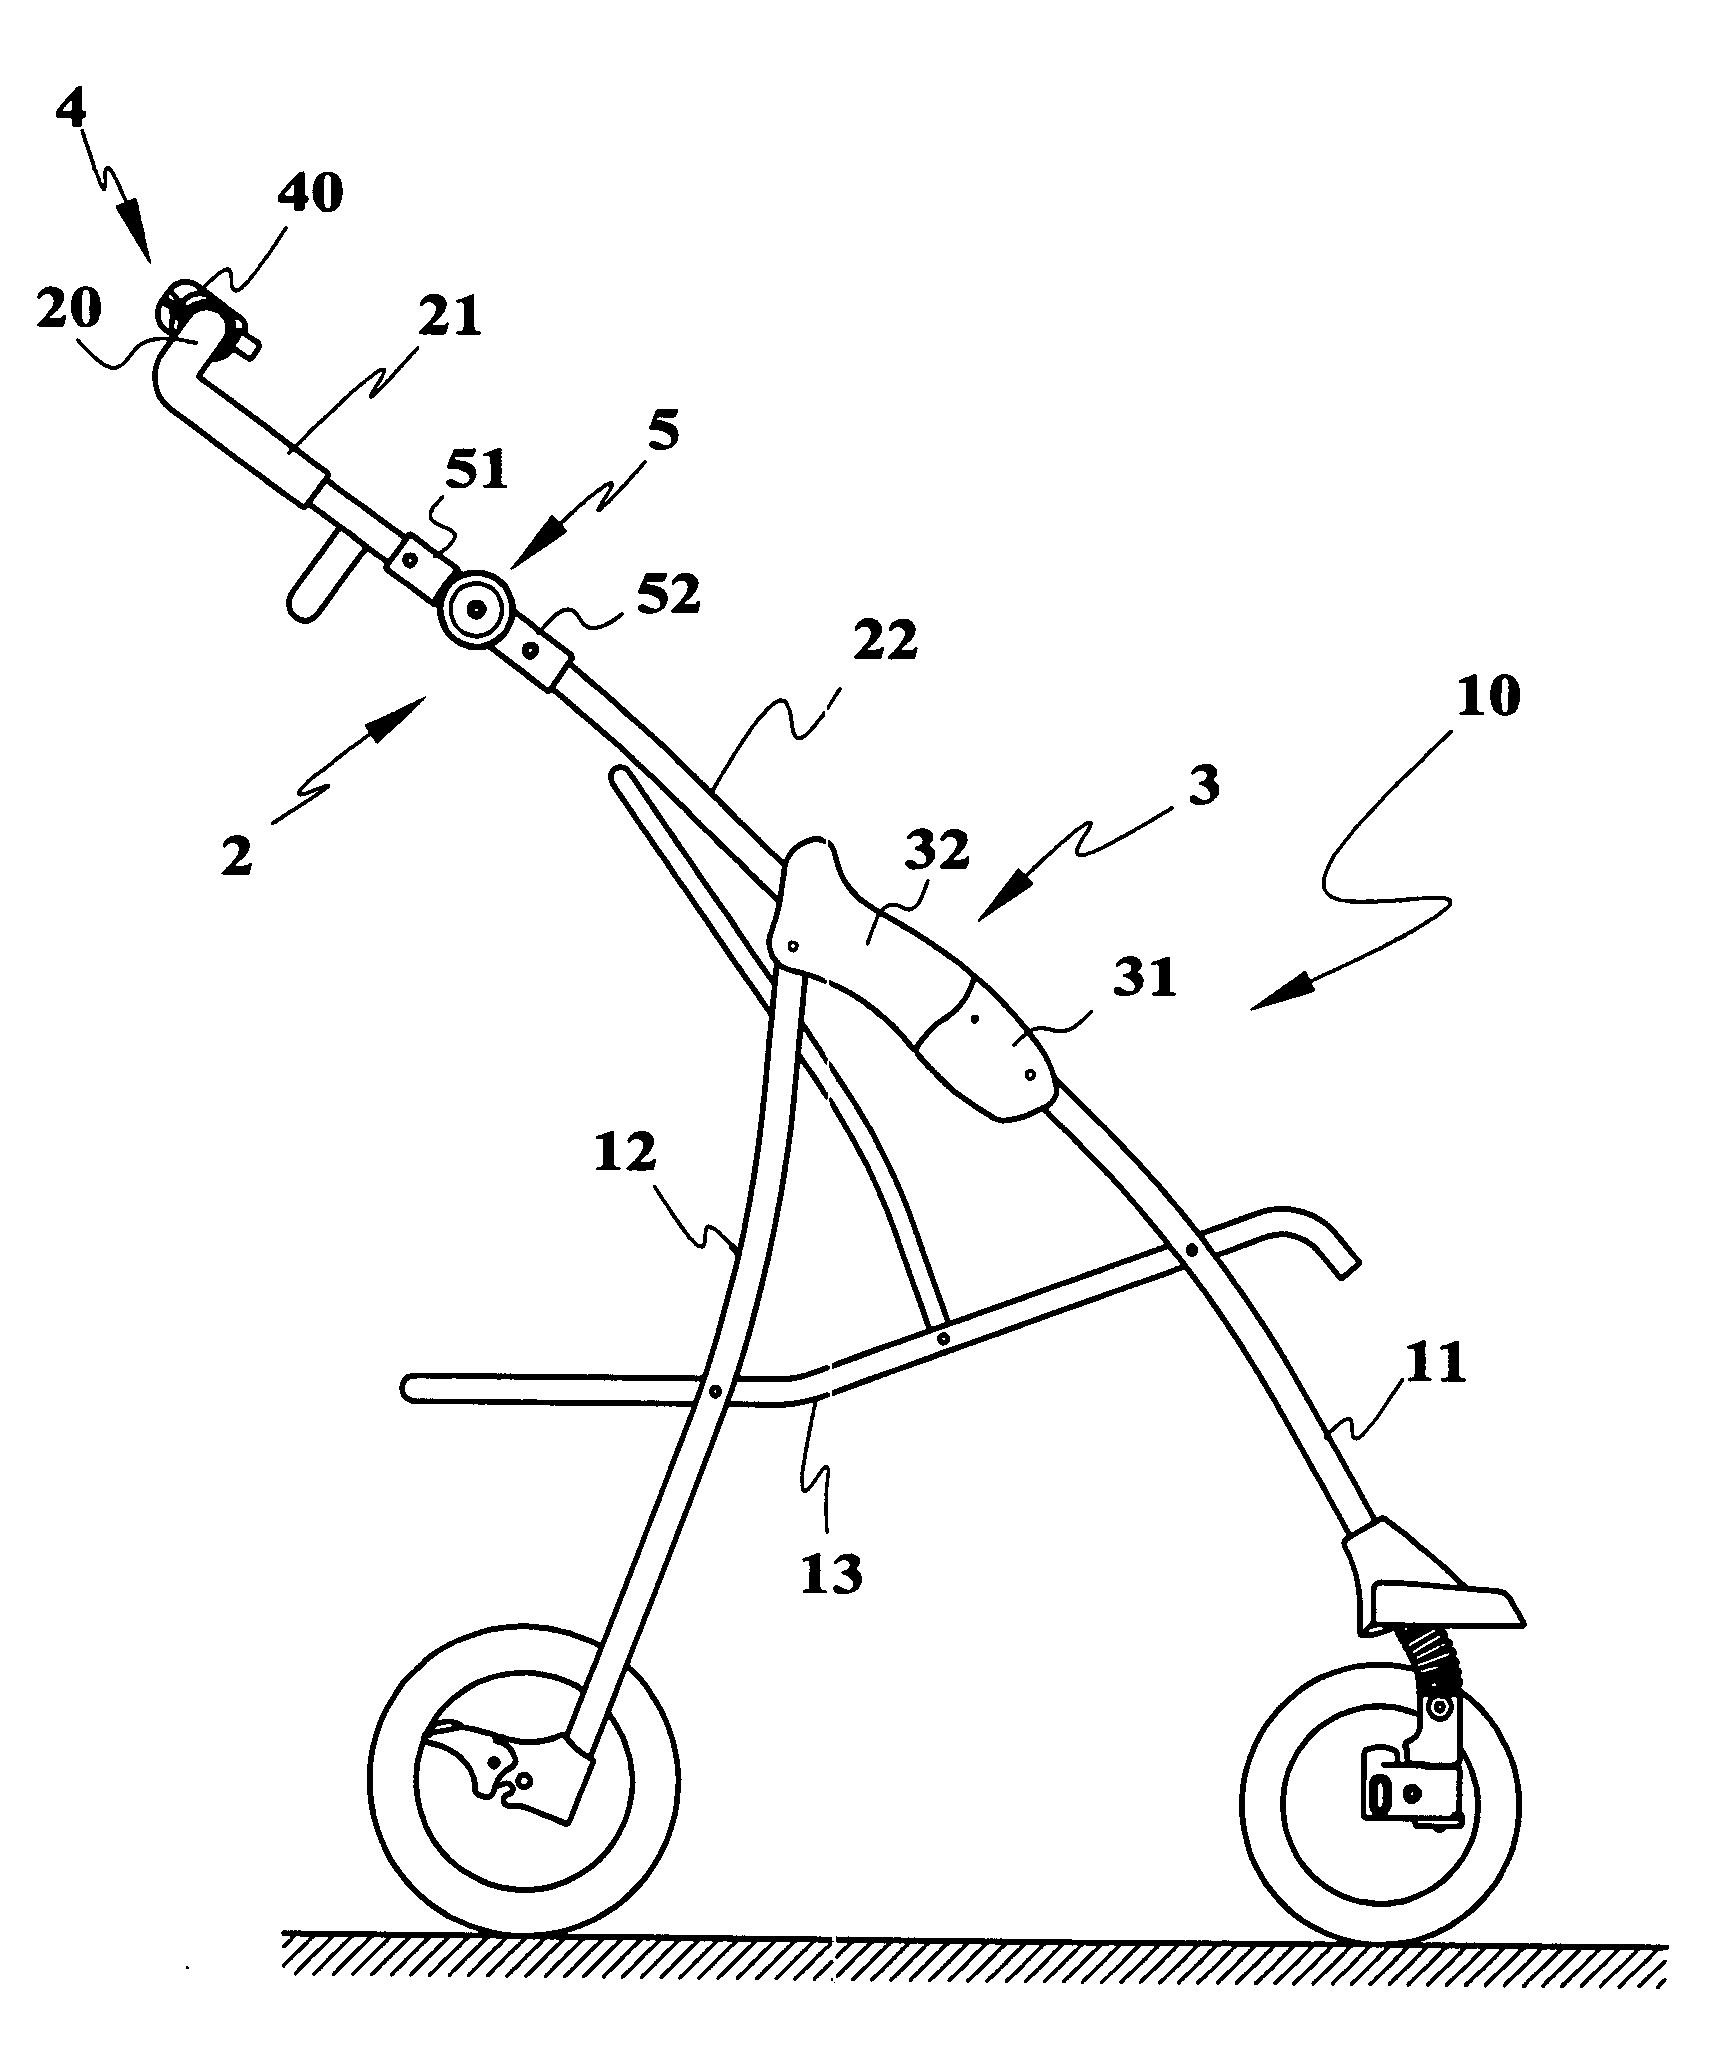 Folding control mechanism for a baby stroller